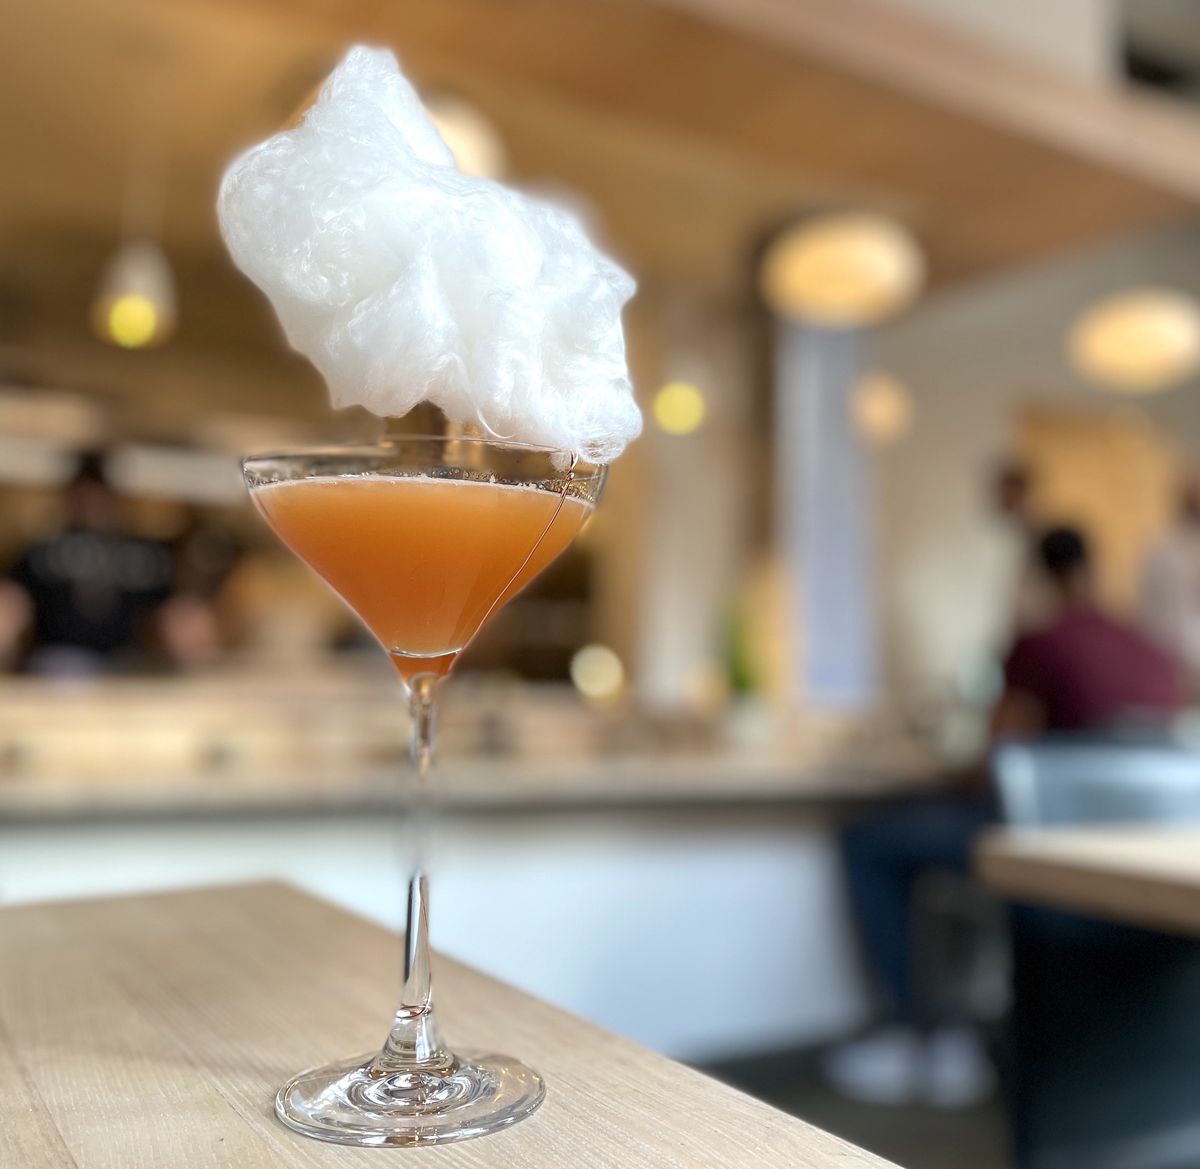 A martini glass is filled with orange liquid on a blonde wood table. It appears that there is a floating cloud above the glass